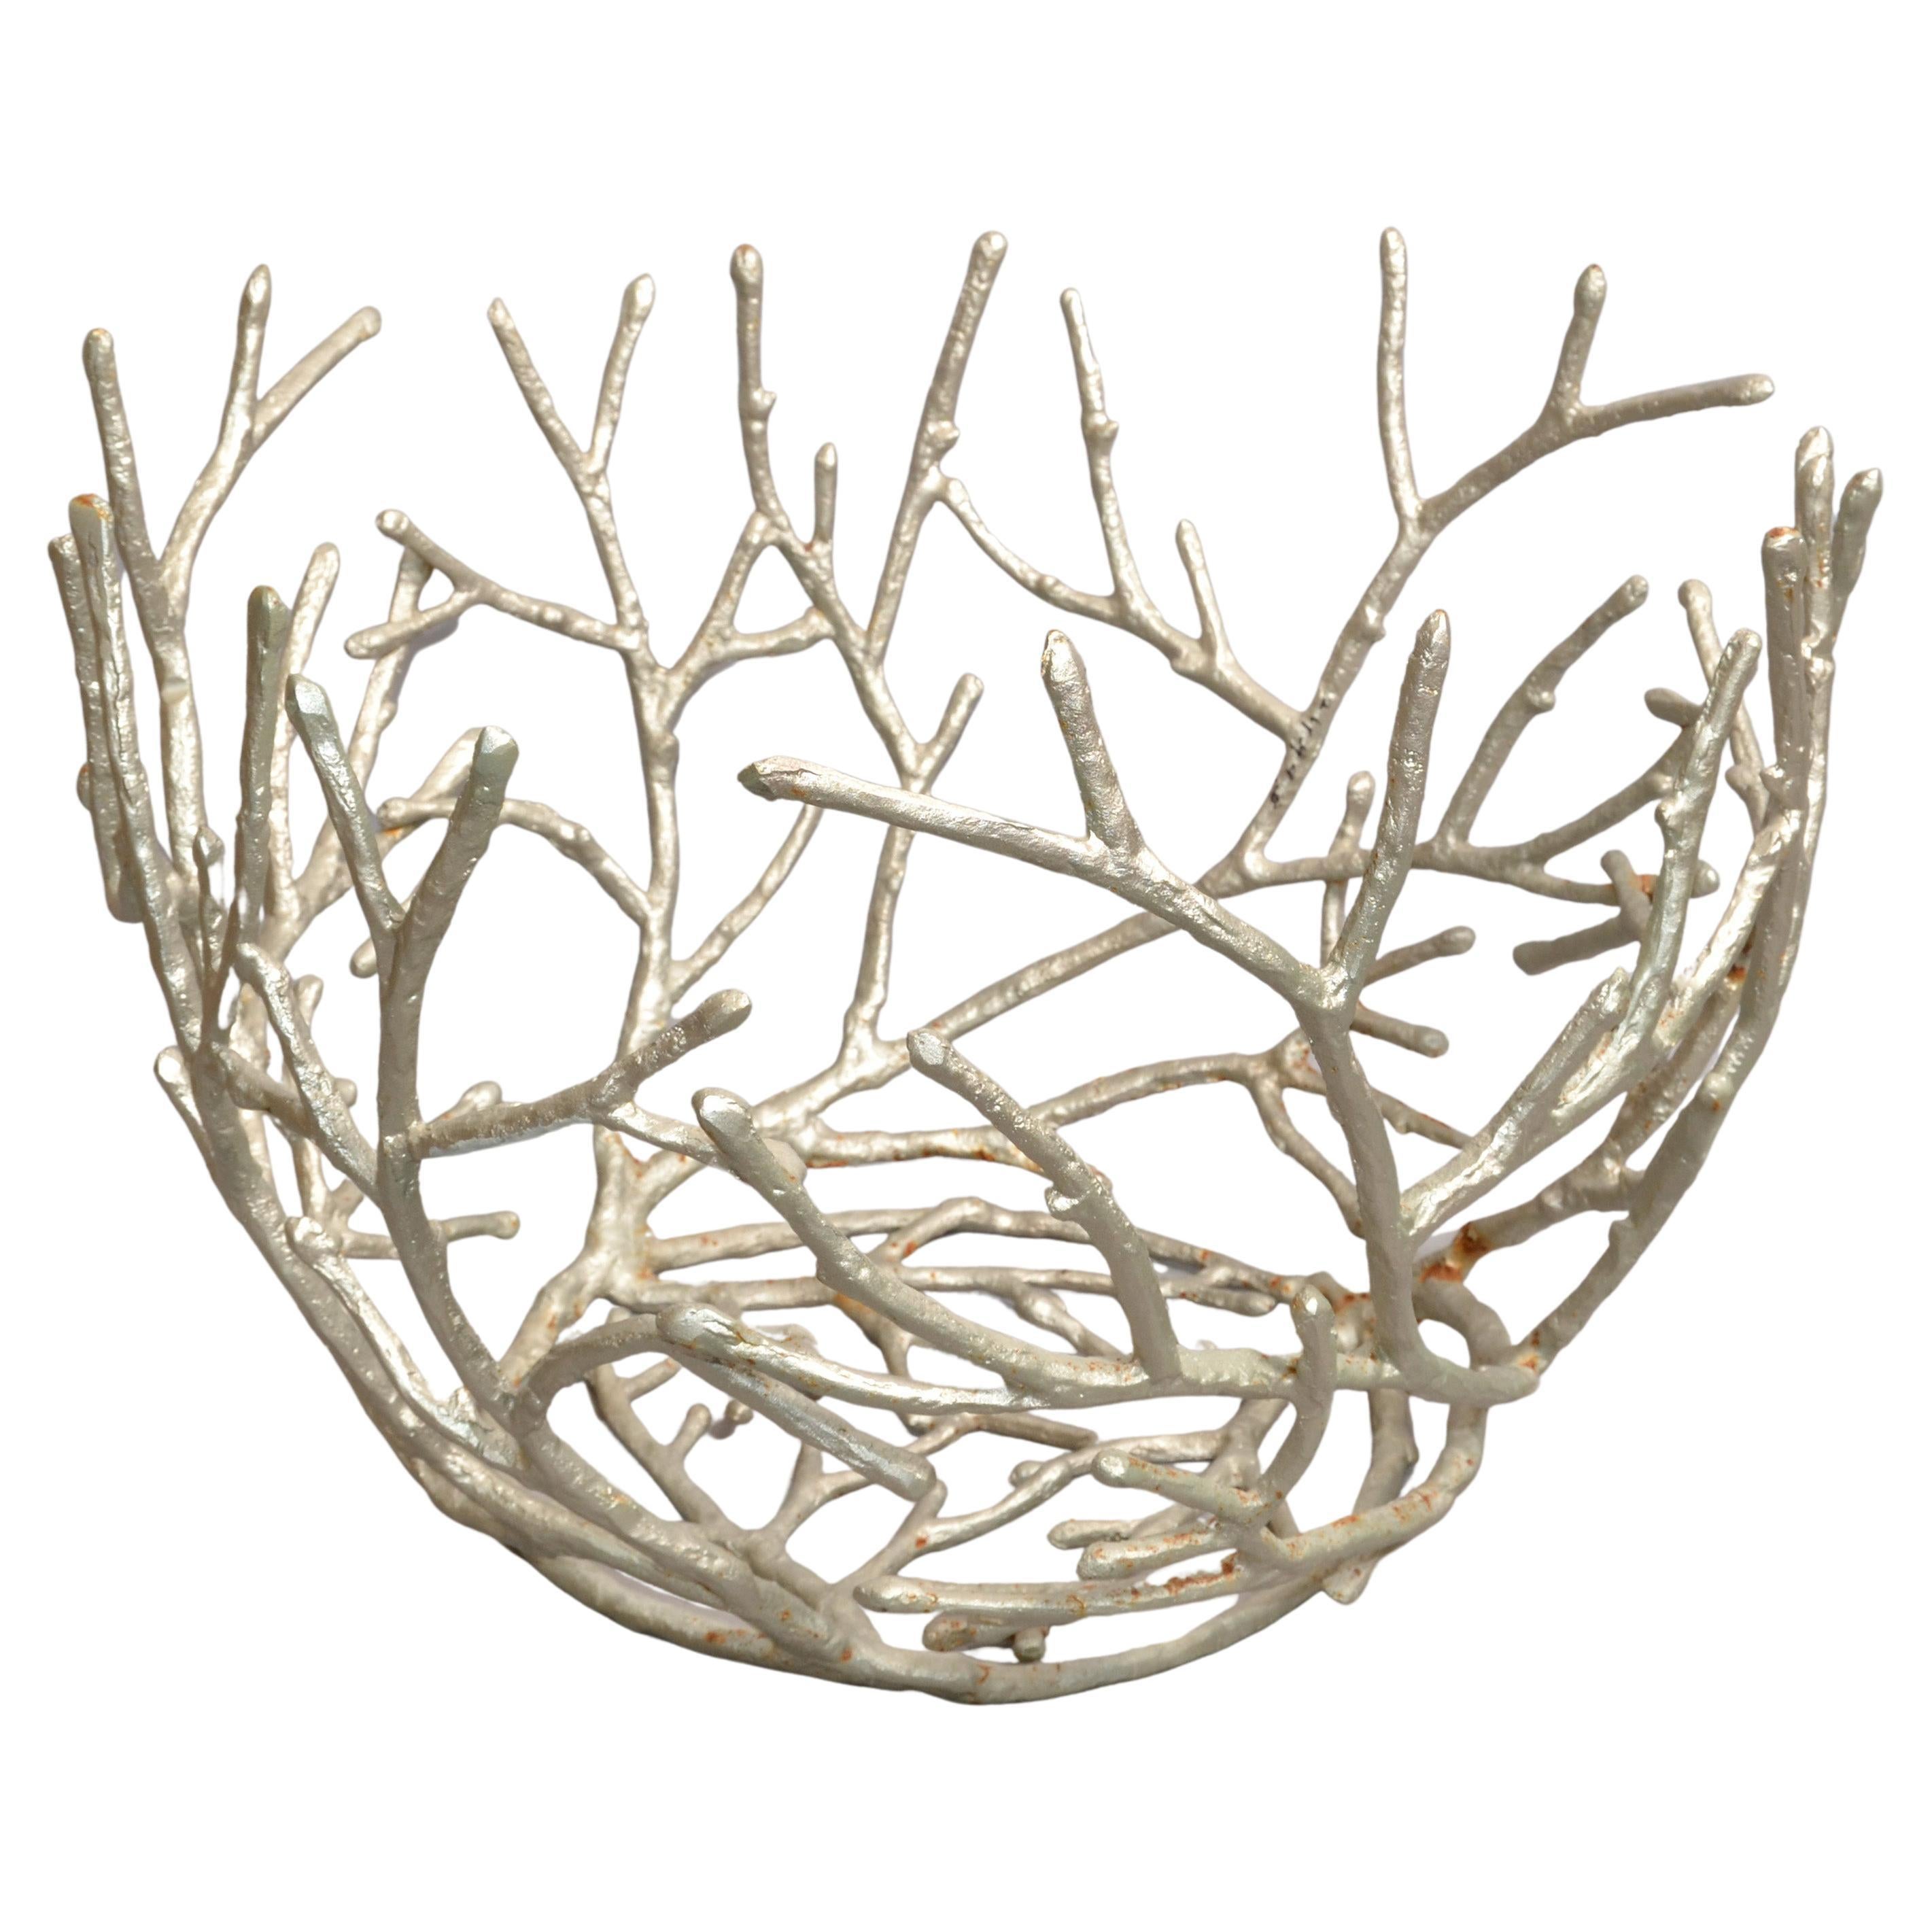 1970s, Sculptural Organic Coral Shaped Distressed Silver Finish Aluminum Planter